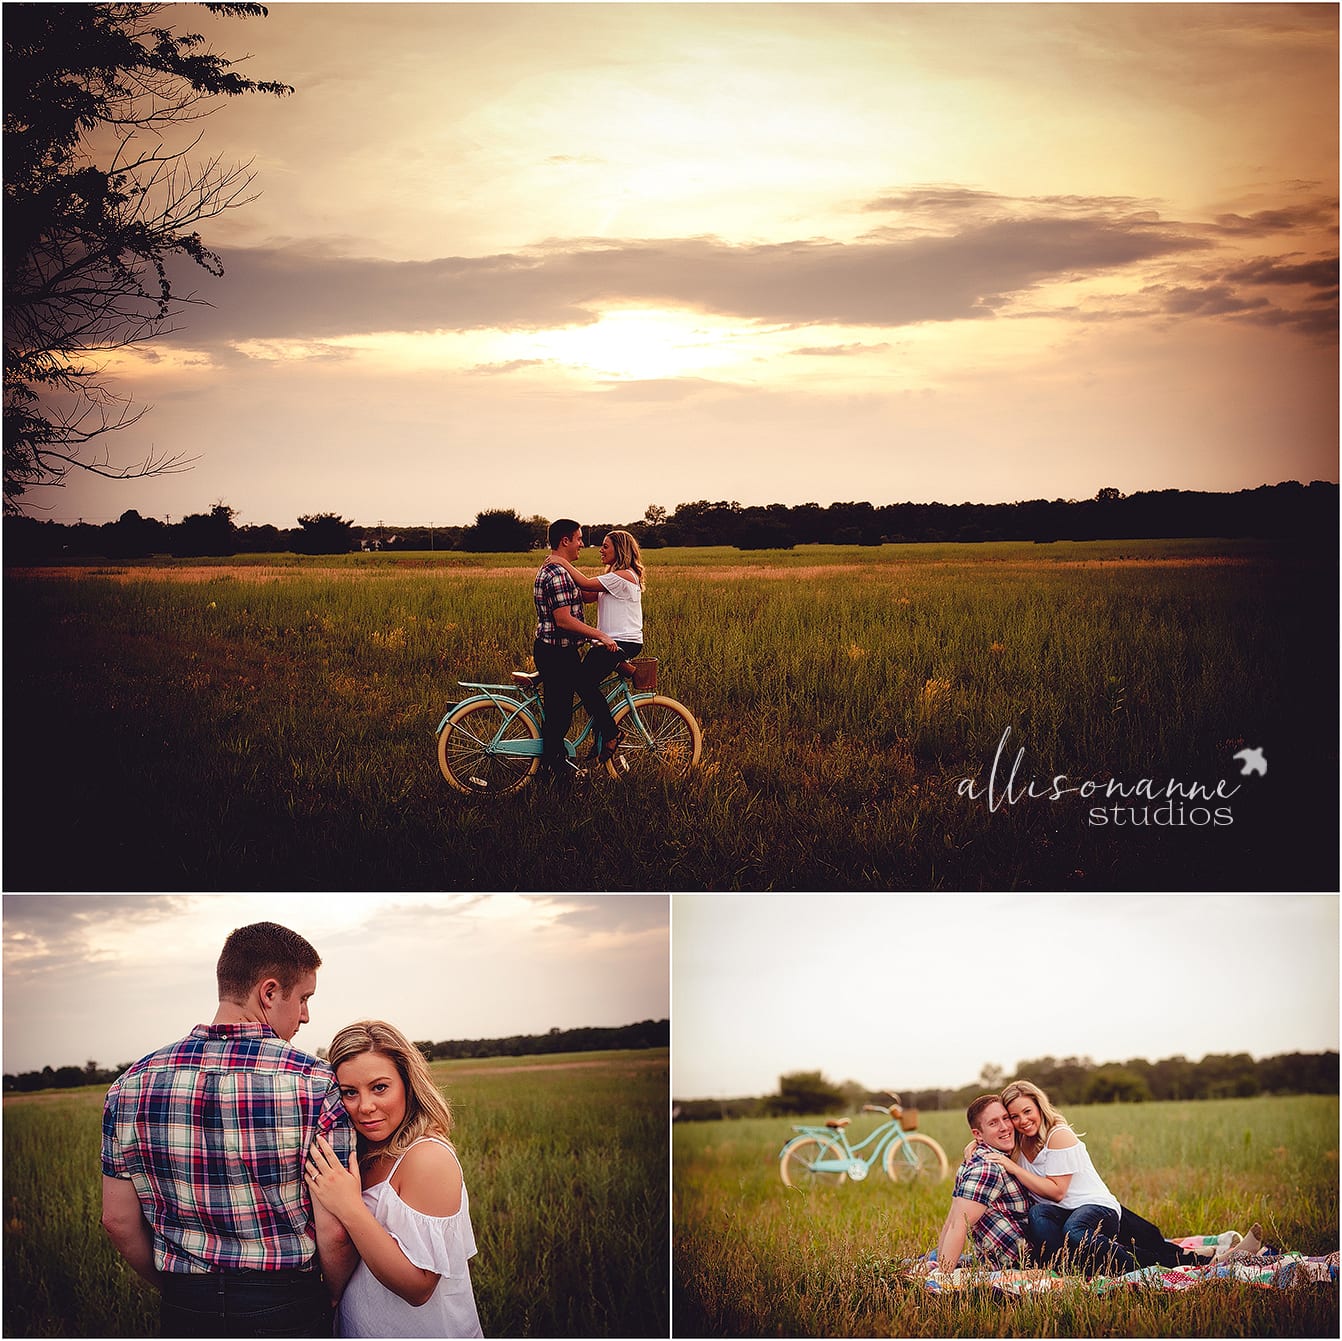 Summer, engagement session, AllisonAnne Studios, Greenview Inn, Eastlyn Golf Course, Vintage Bicycle, peach orchards, Best Photographer South Jersey, Hammonton 